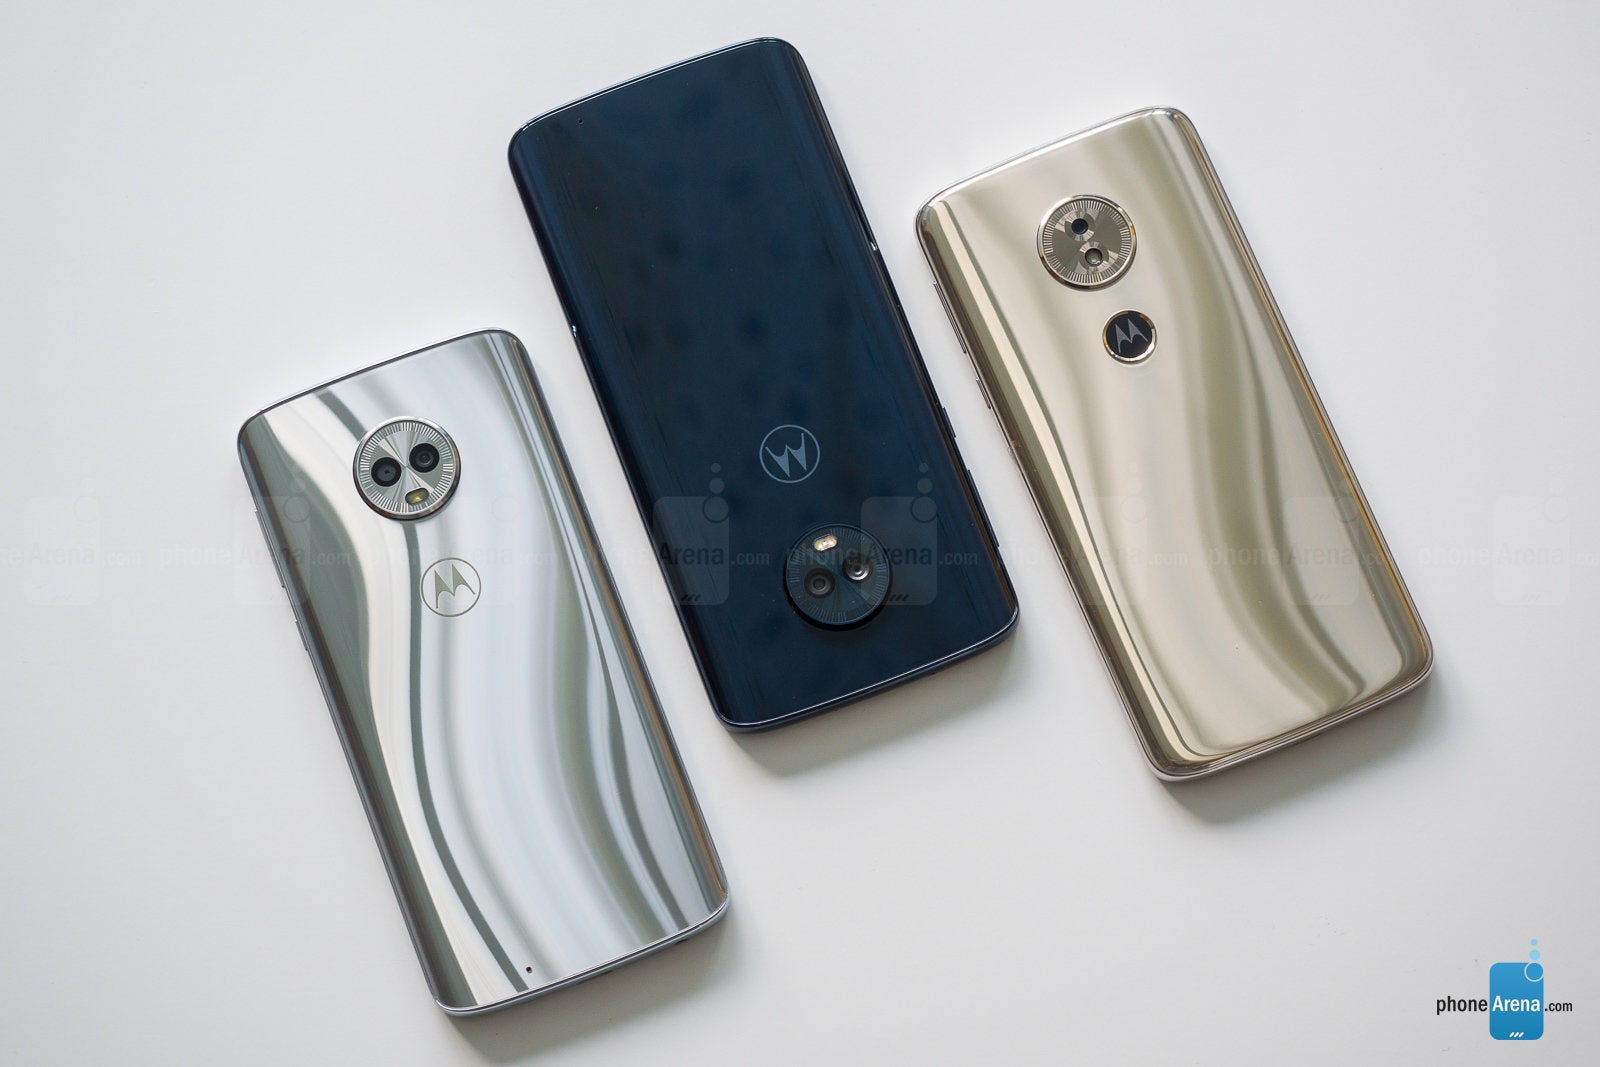 Left to right - Moto G6, G6 Plus, G6 Play - Motorola Moto G6, G6 Plus and G6 Play Review